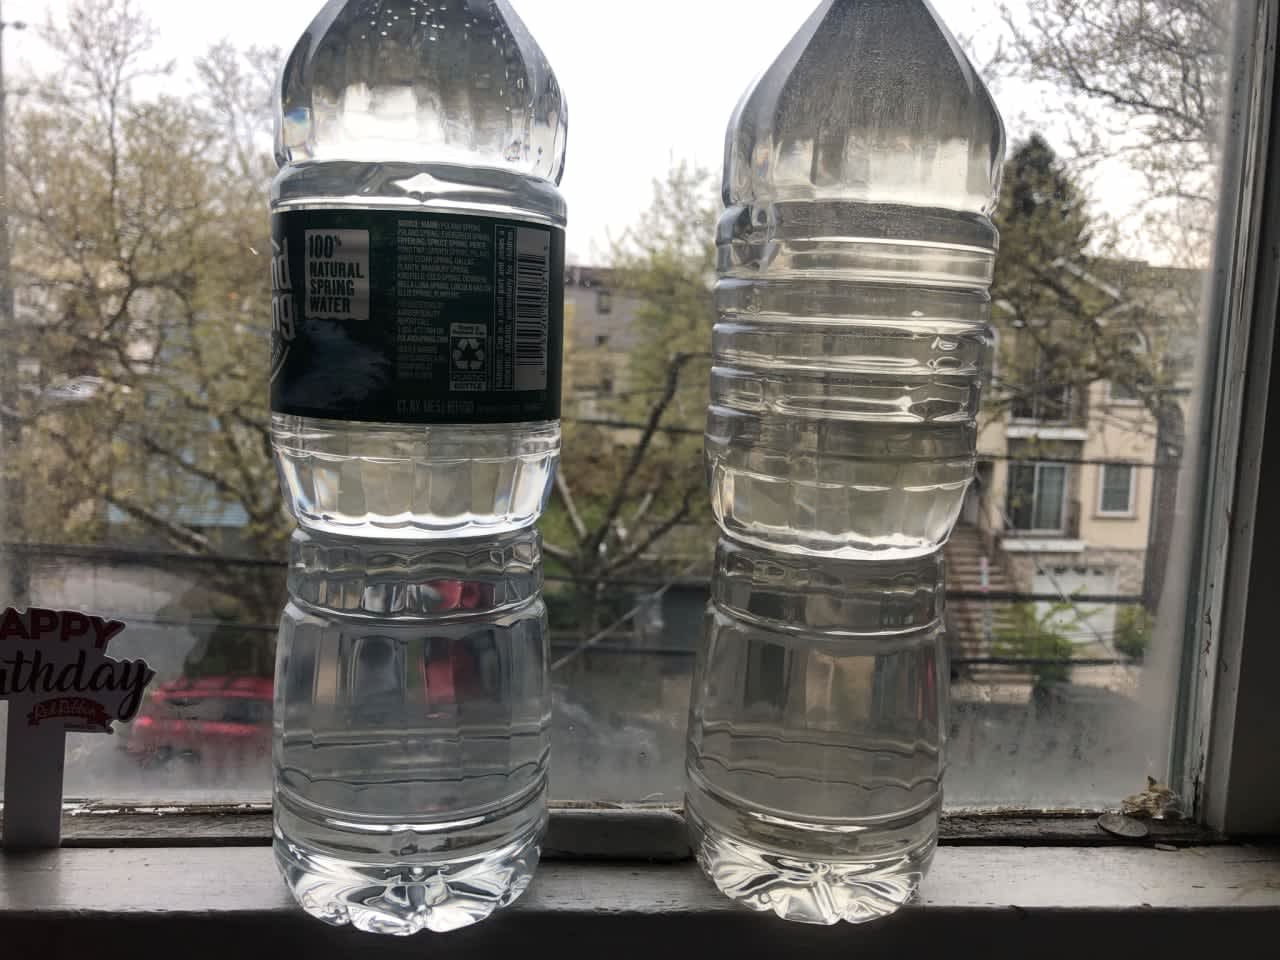 Comparison of bottled water vs. boiled (to boiling point actually). "At this point don’t think boiled water is safe," the Liberty Avenue resident said Wednesday on Twitter.